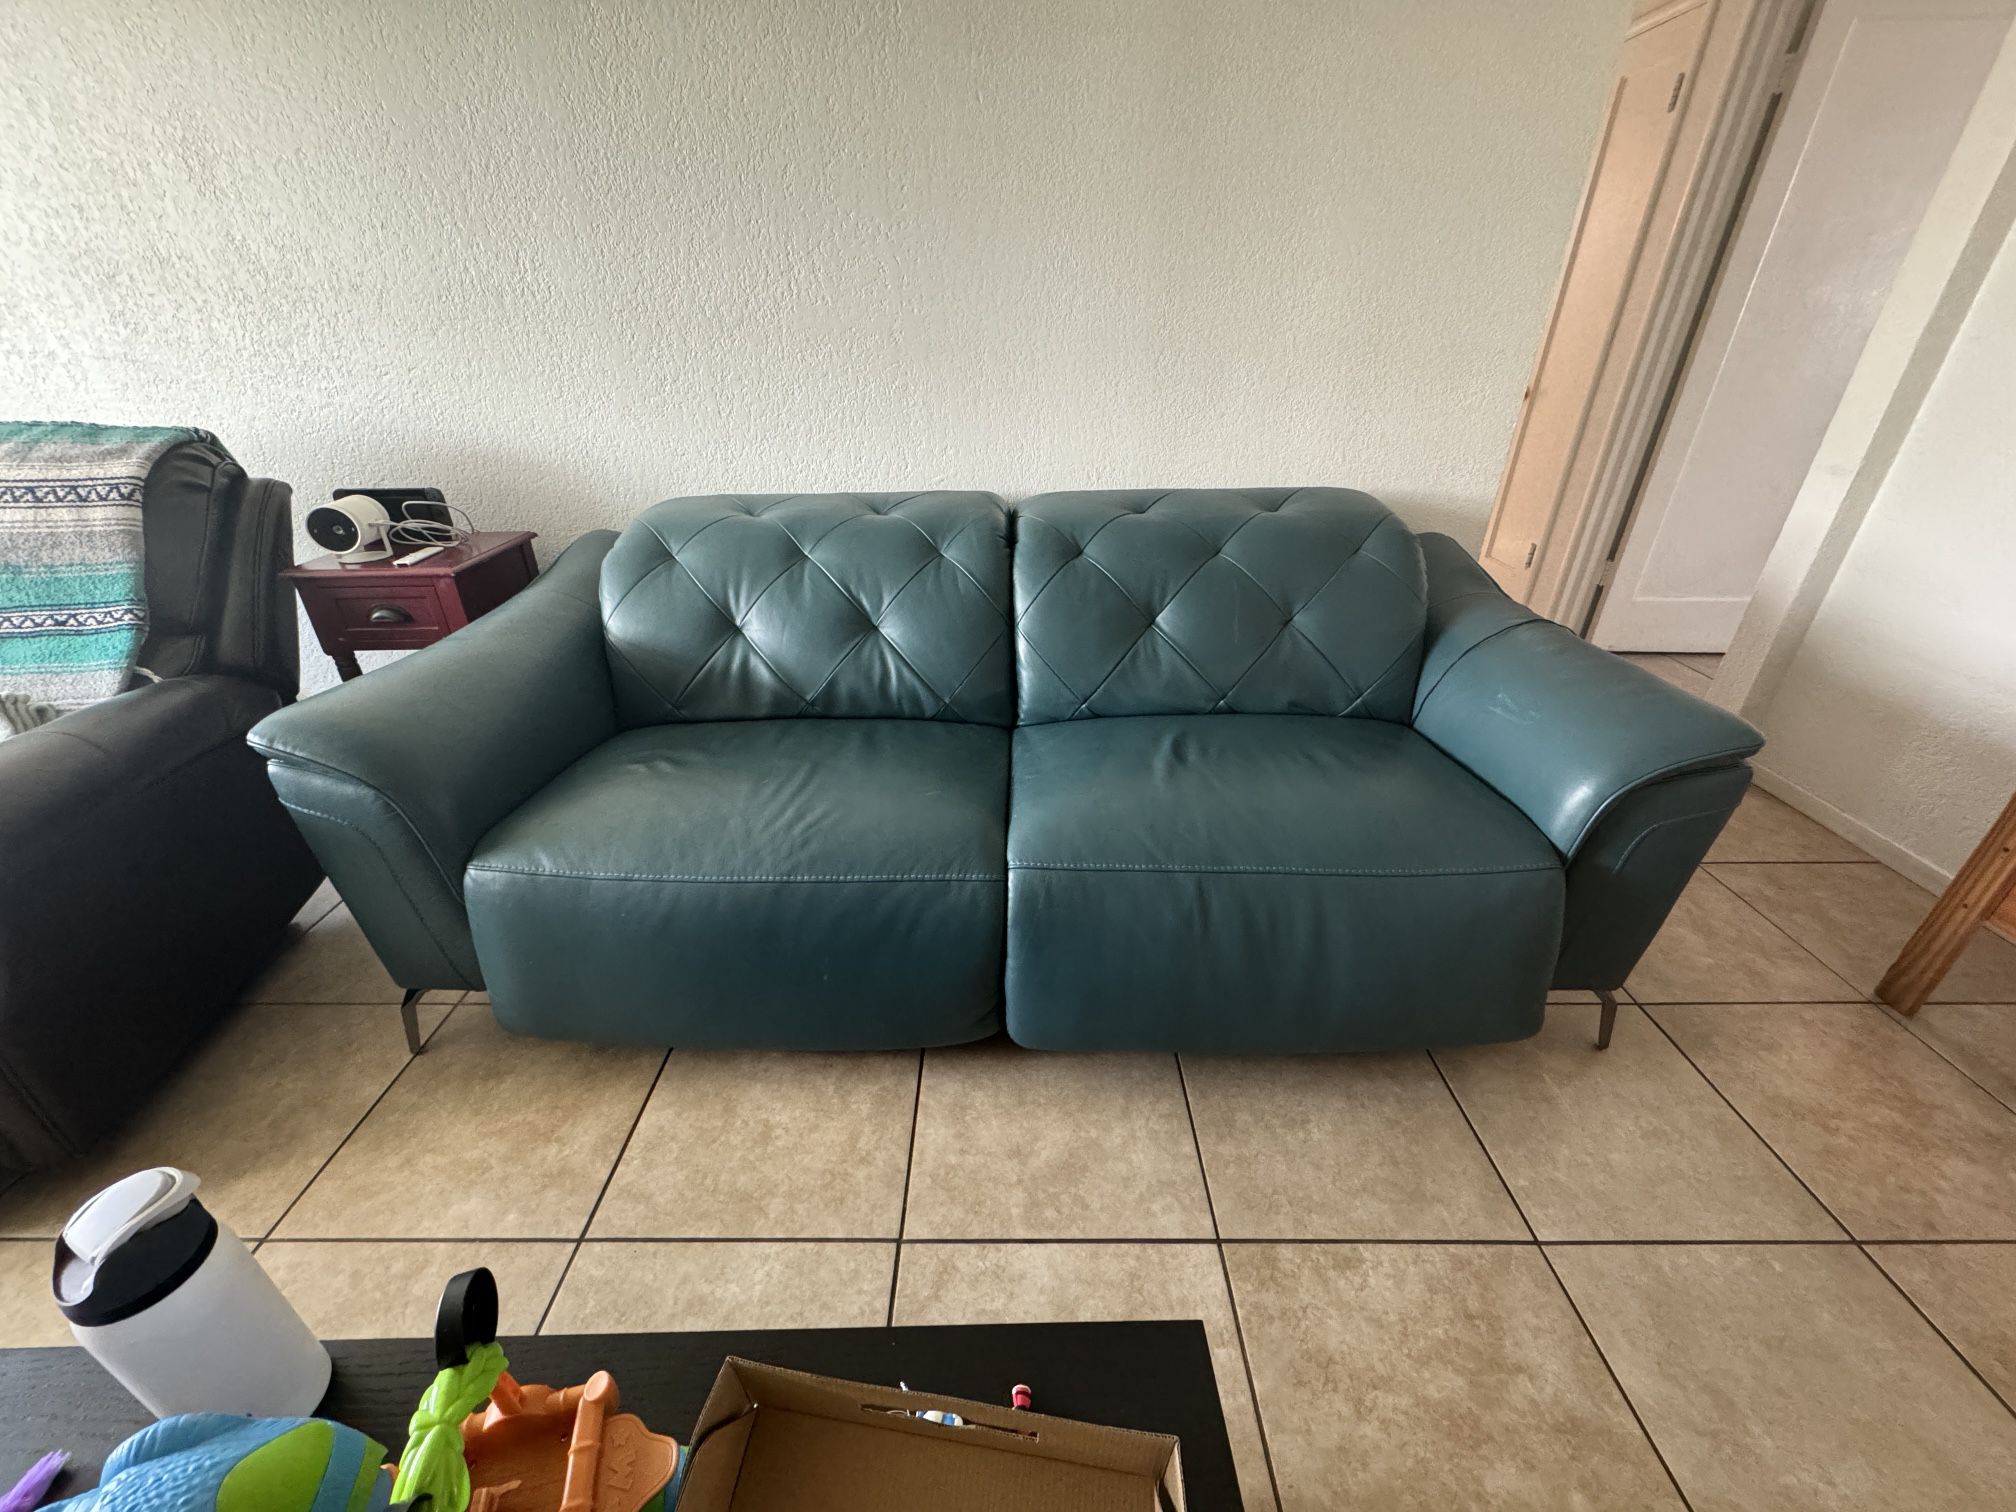 Teal Leather Couch